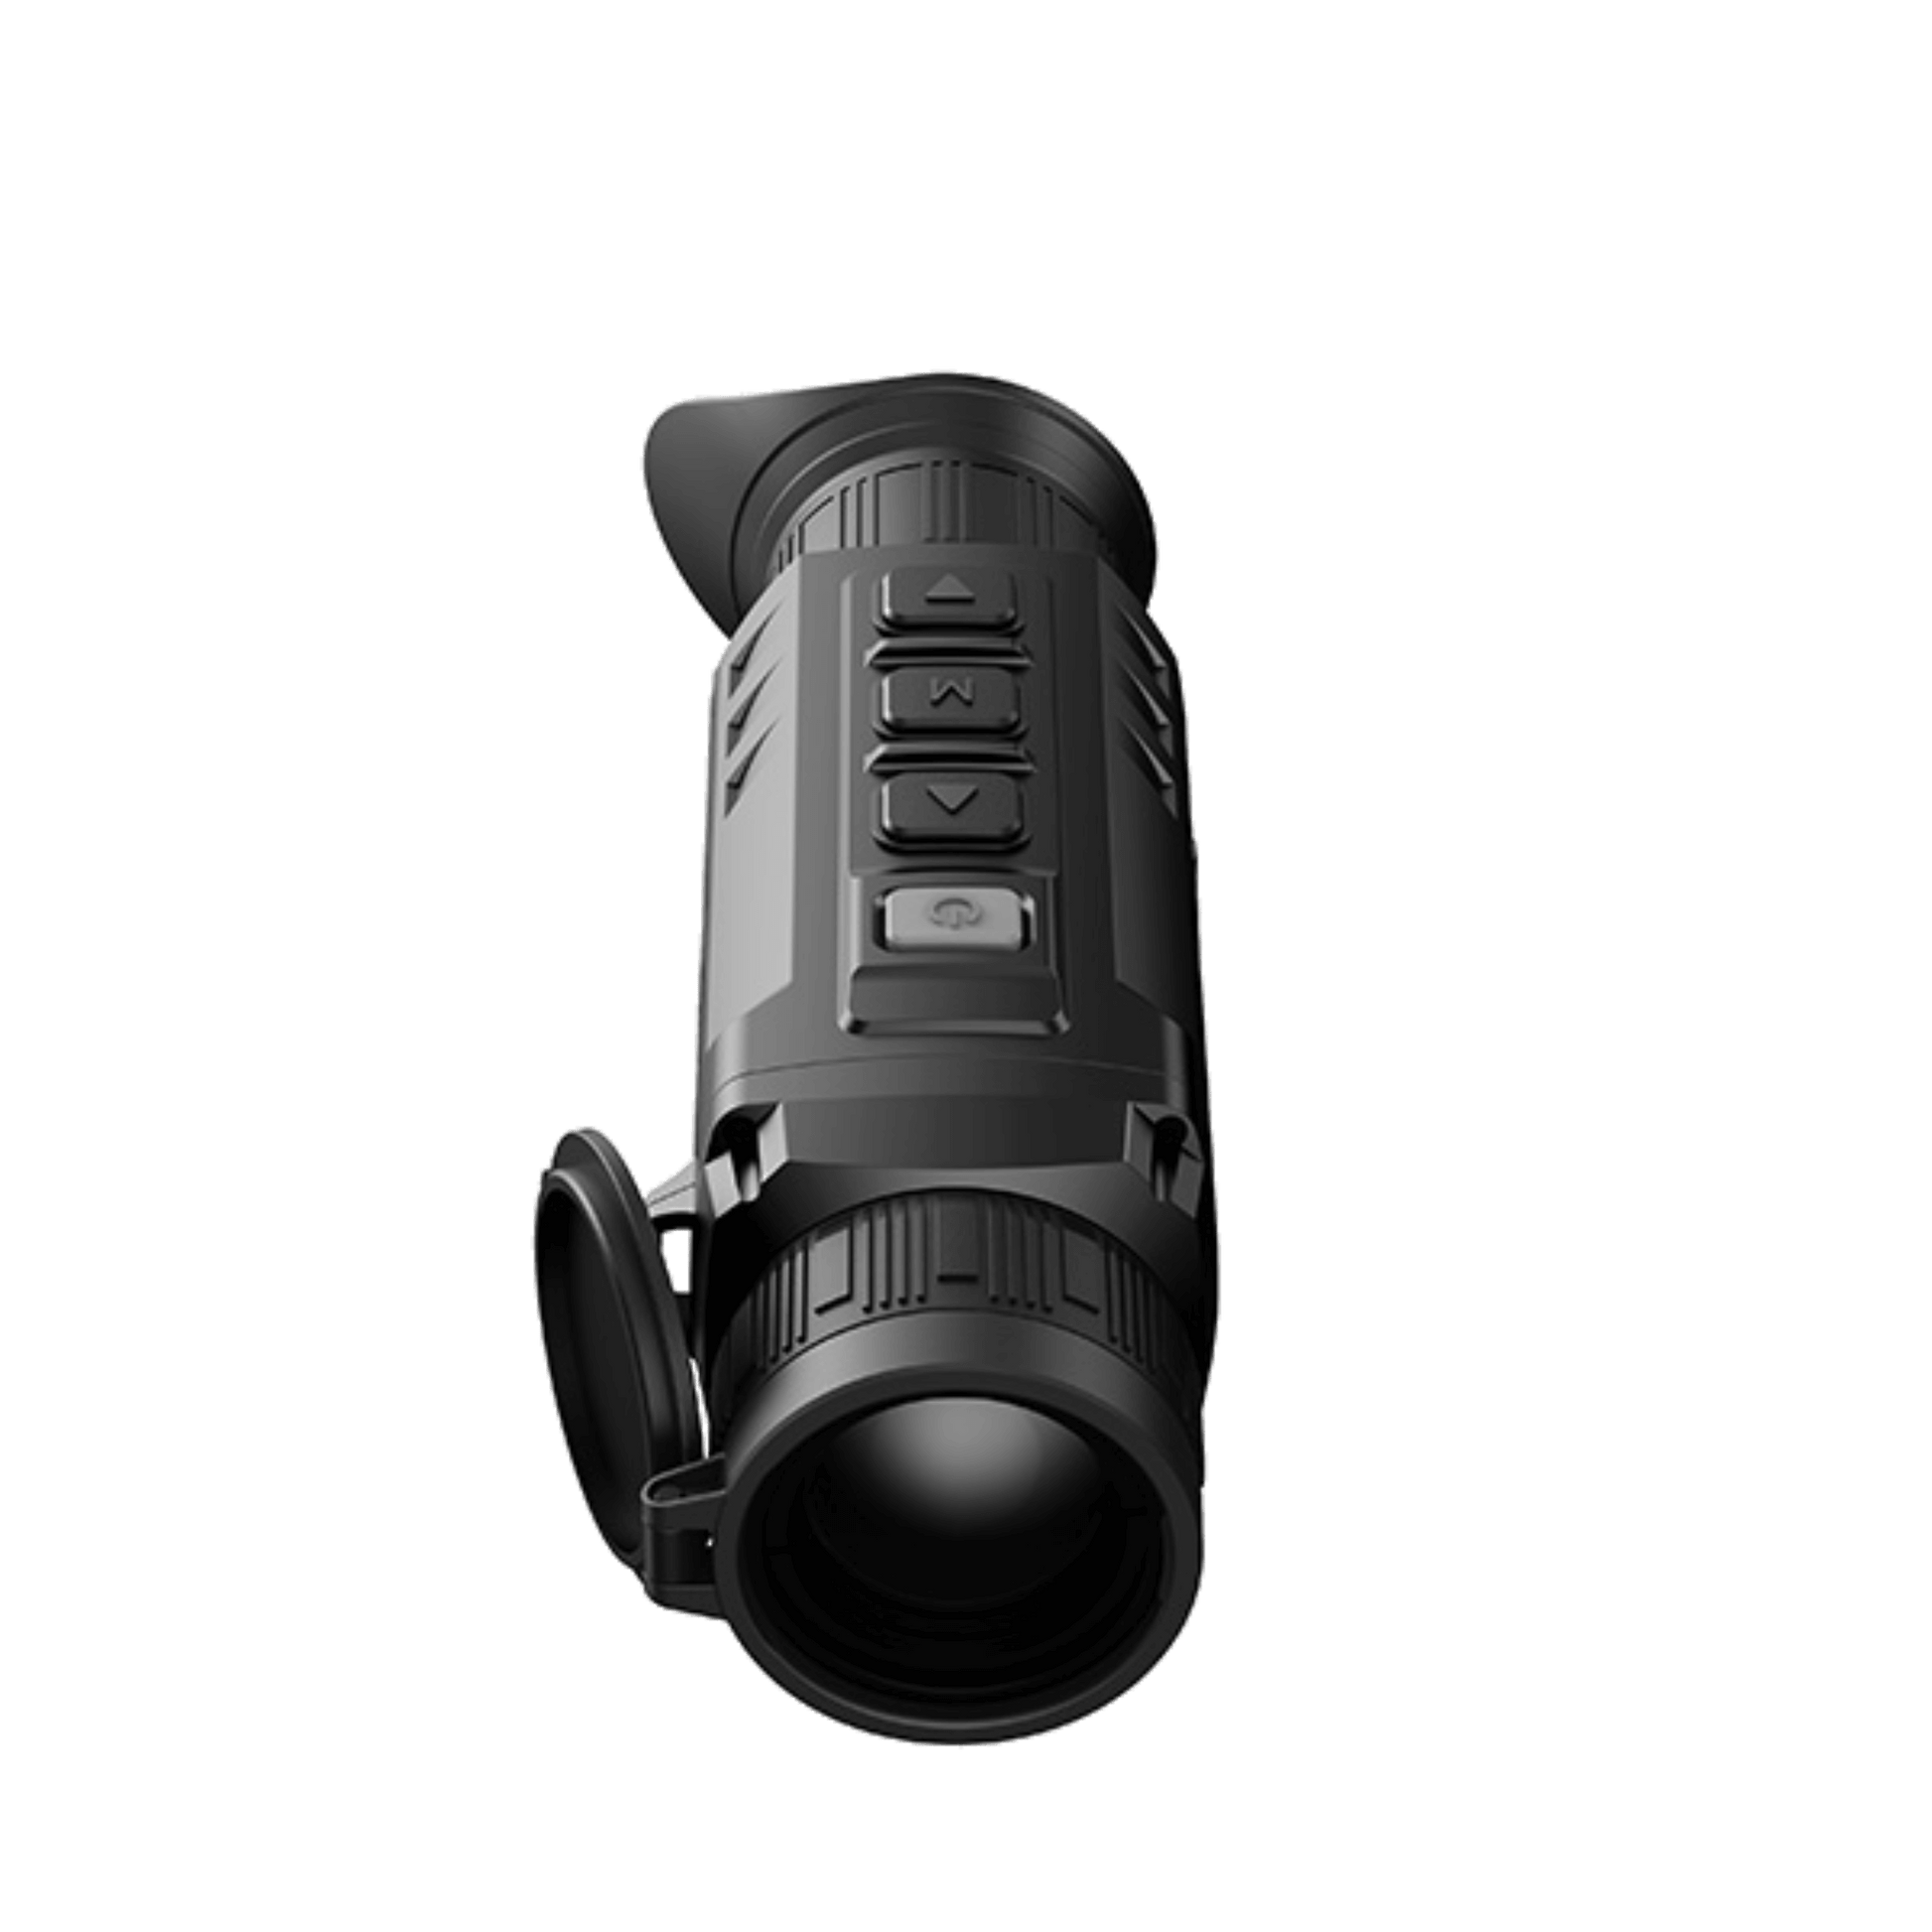 Cape Thermal - The best thermal imaging monoculars for sale - Infiray Zoom Series ZH38 Handheld thermal imaging monocular - Front View